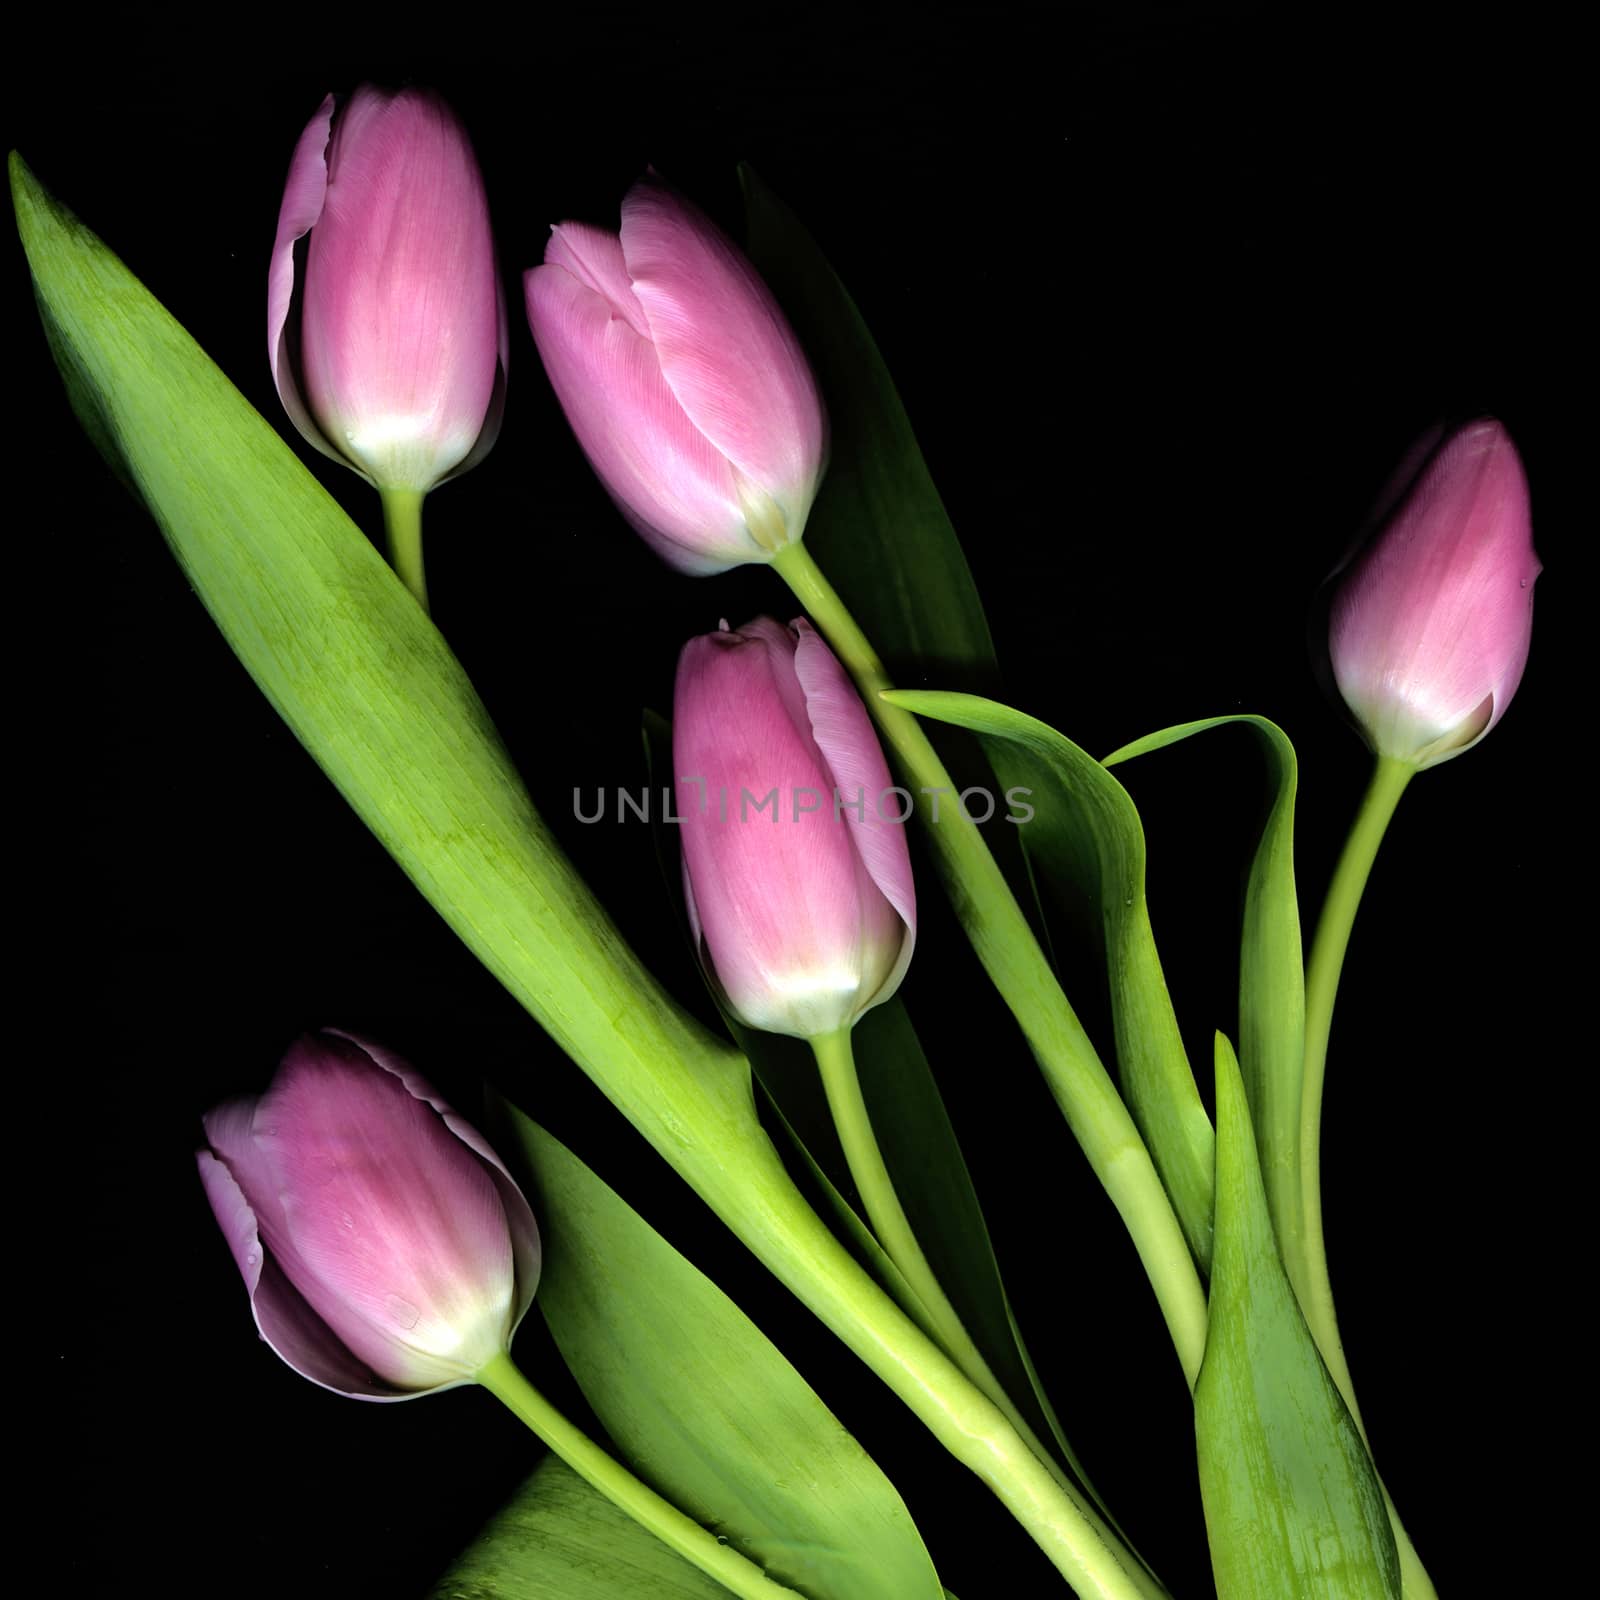 Pink Tulips in studio study in close up.

A beautiful floral portrait of pink tulips set dramatically against a black background..